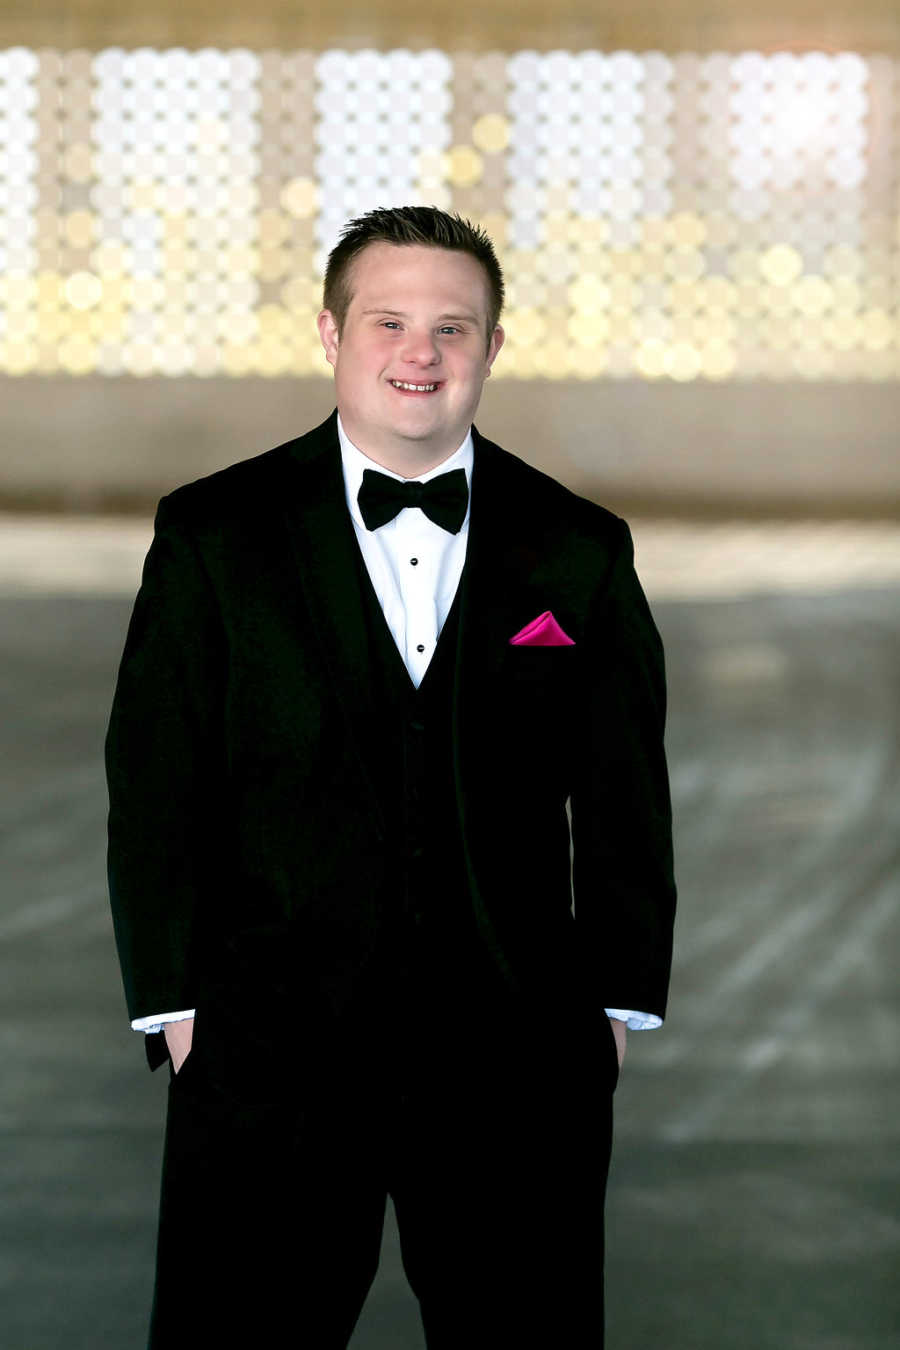 Special needs teen standing in suit smiling before prom